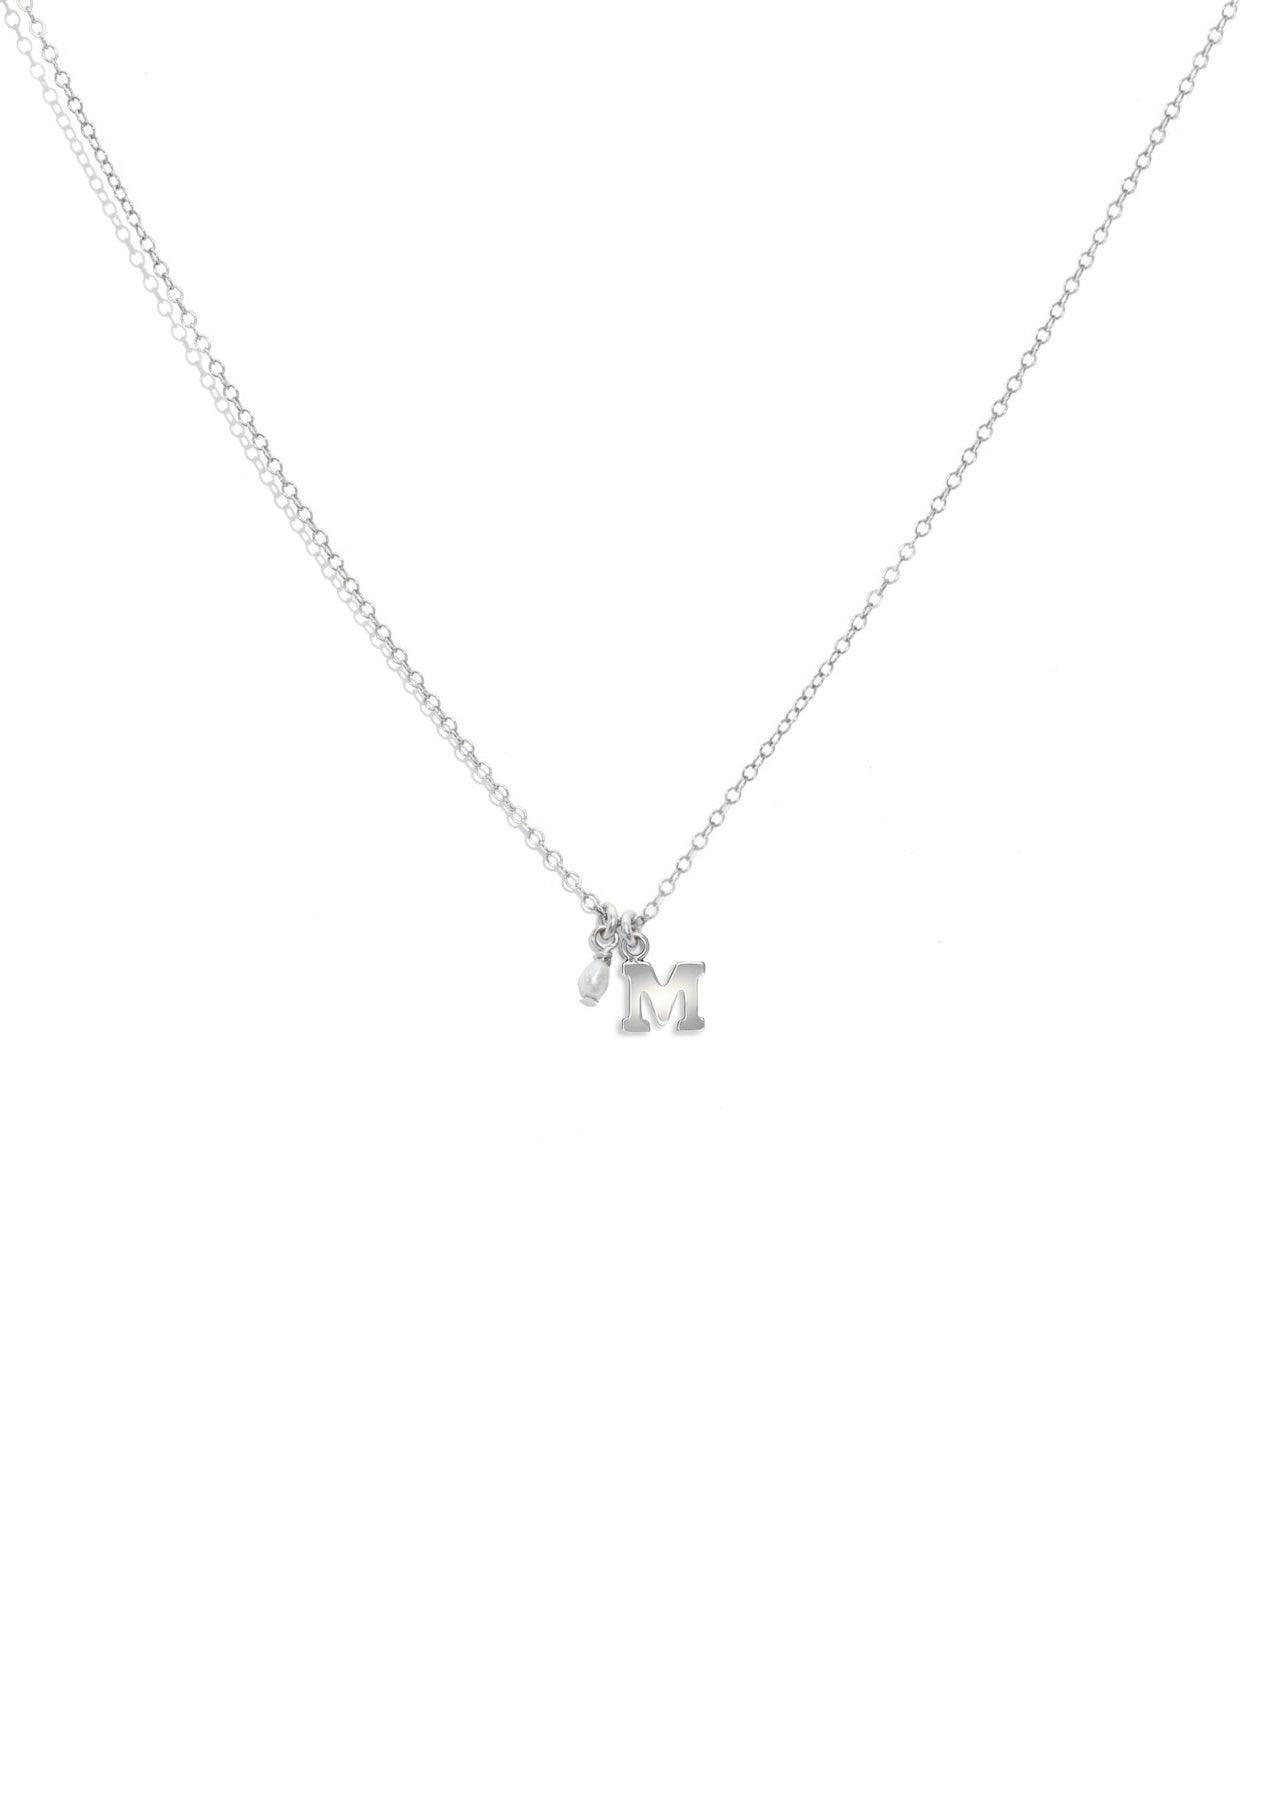 The Silver Initial Charm Necklace